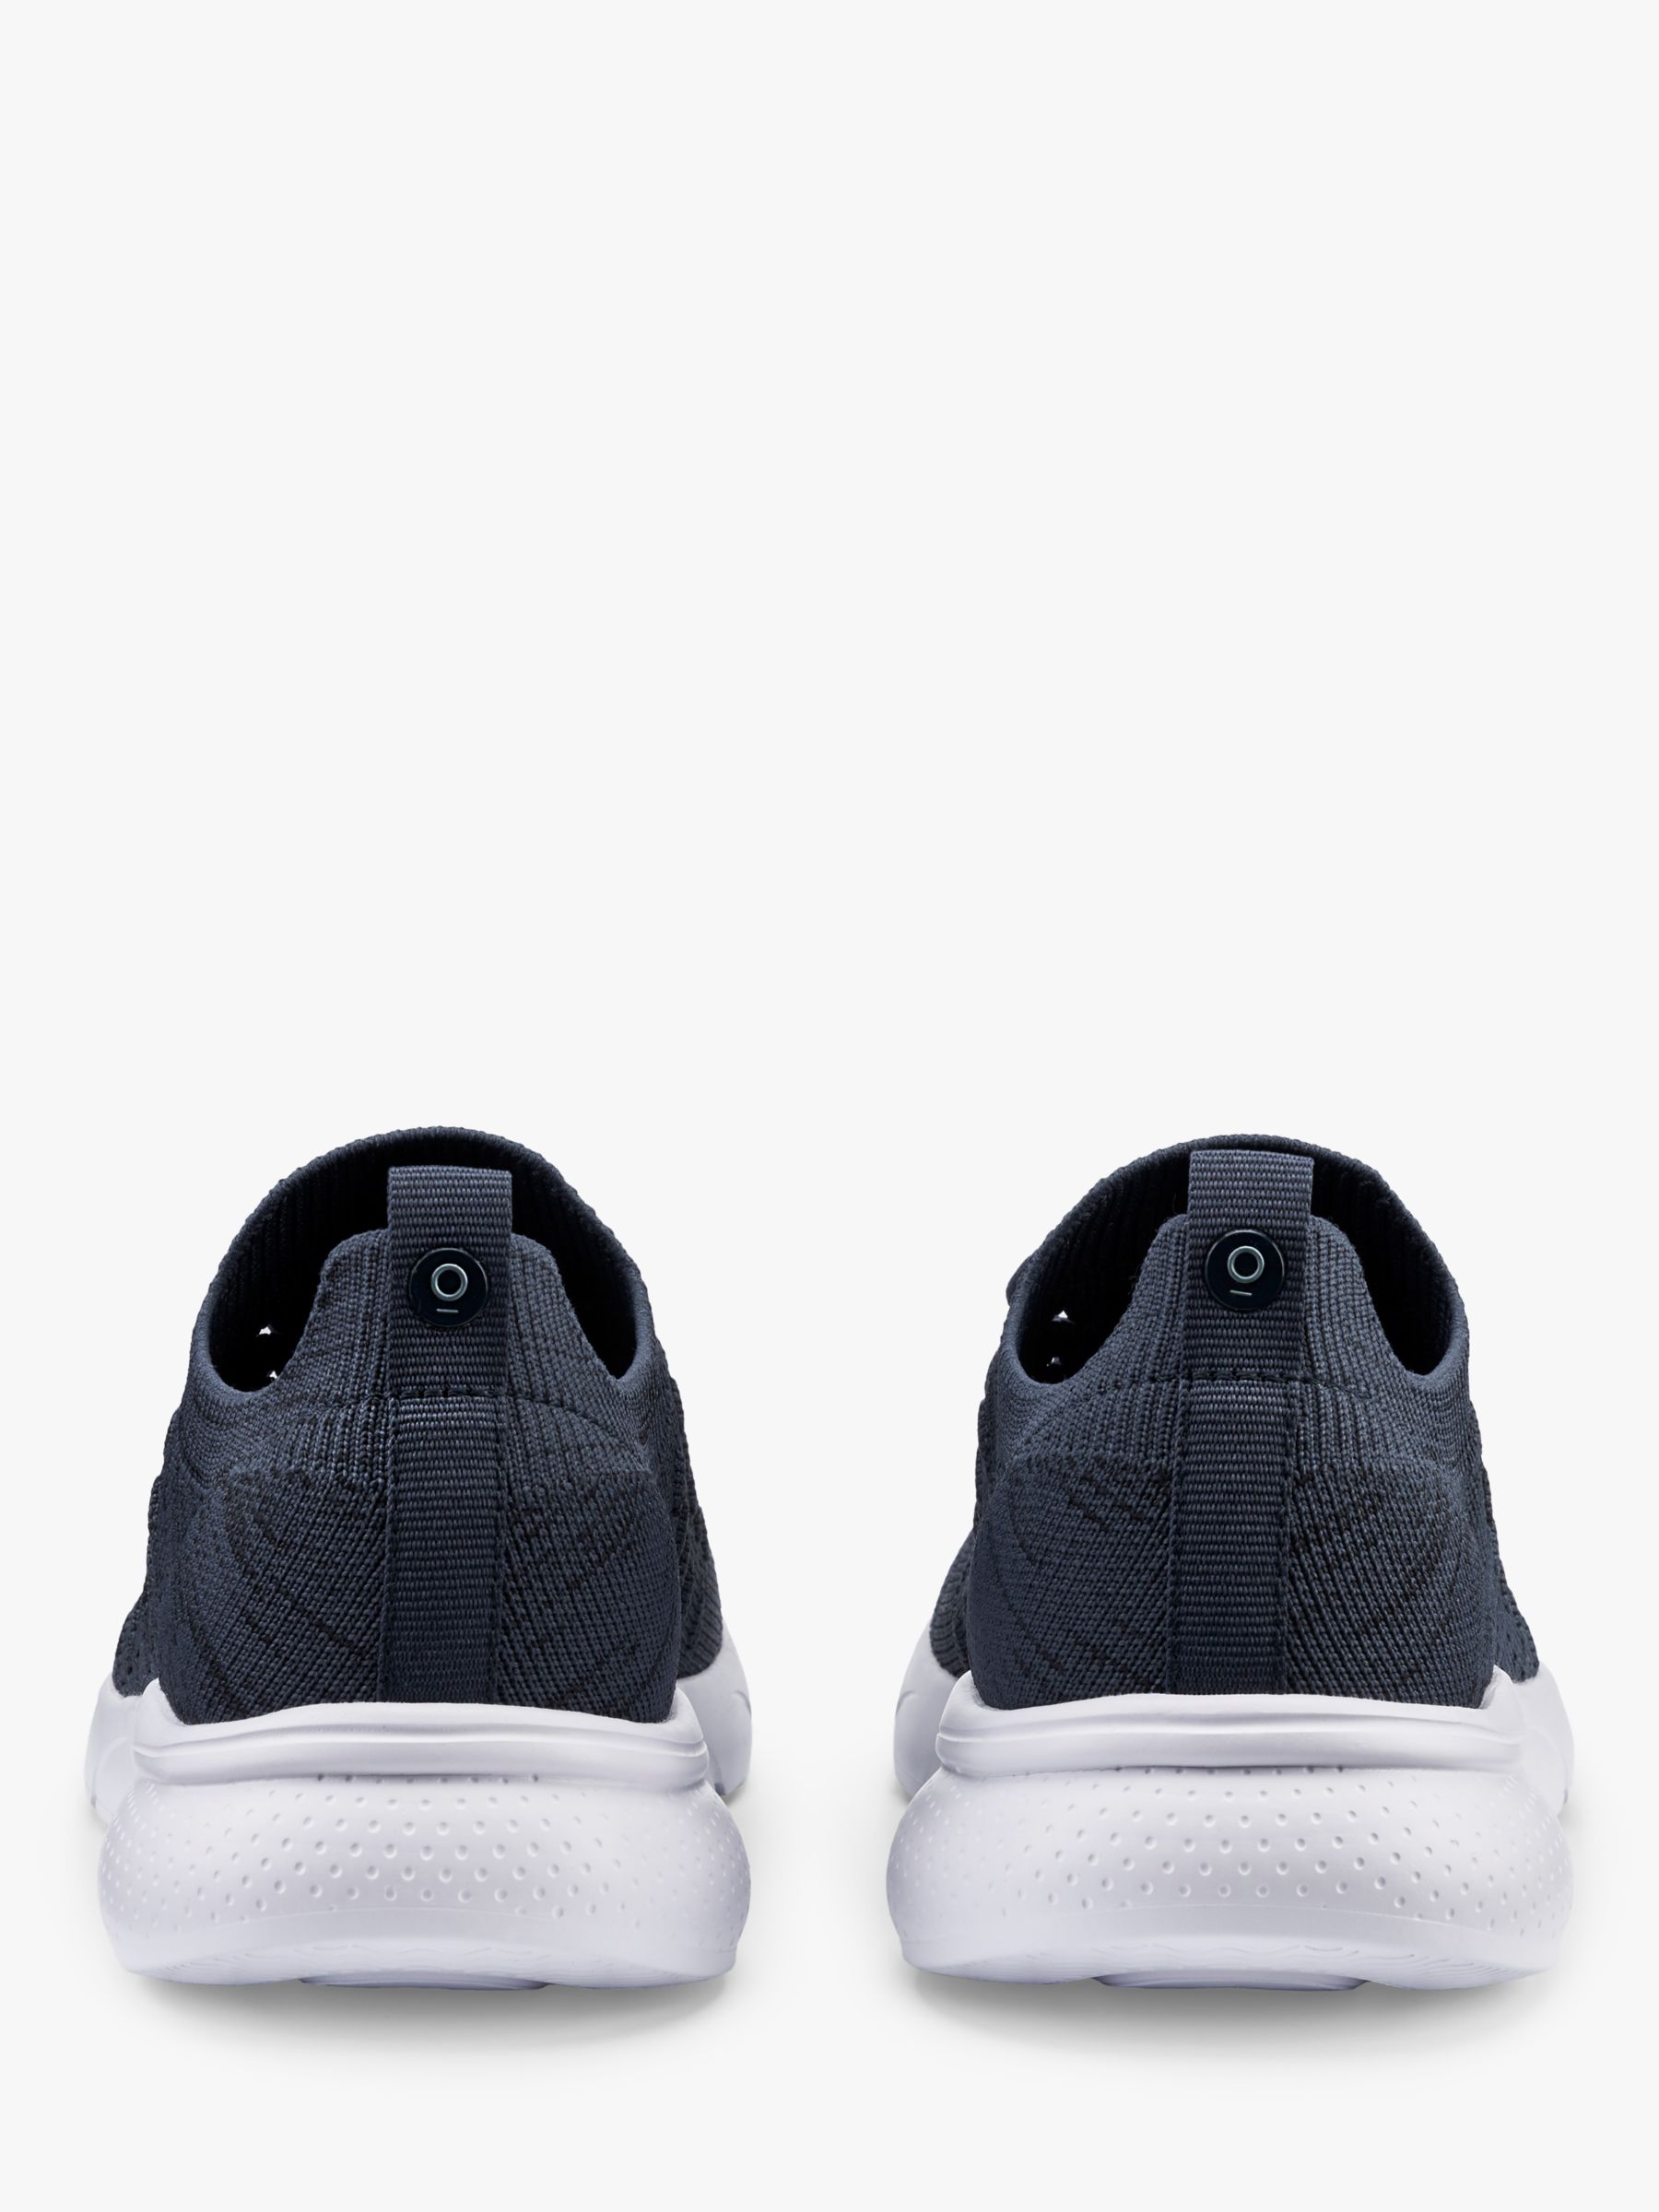 Buy Hotter Defy Knitted Lightweight Trainers Online at johnlewis.com